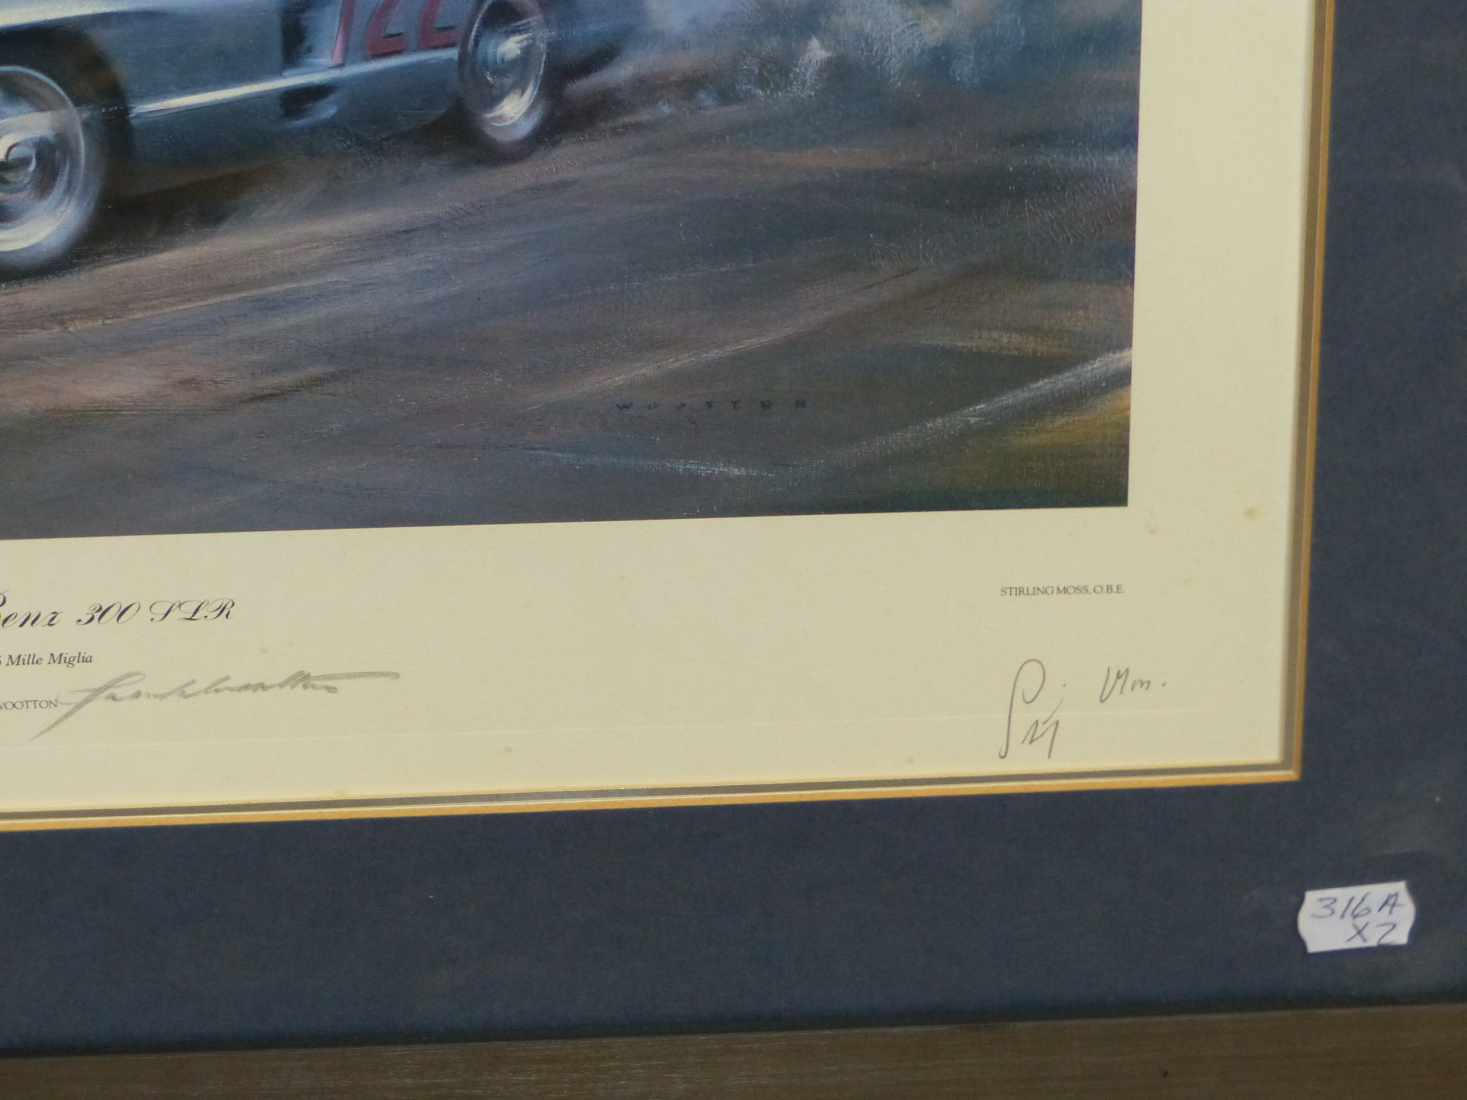 RODNEY DIGGINS, "STERLING MOSS" MONACO 1956, WATERCOLOUR SIGNED AND DATED 1980,TOGETHER WITH - Image 8 of 11